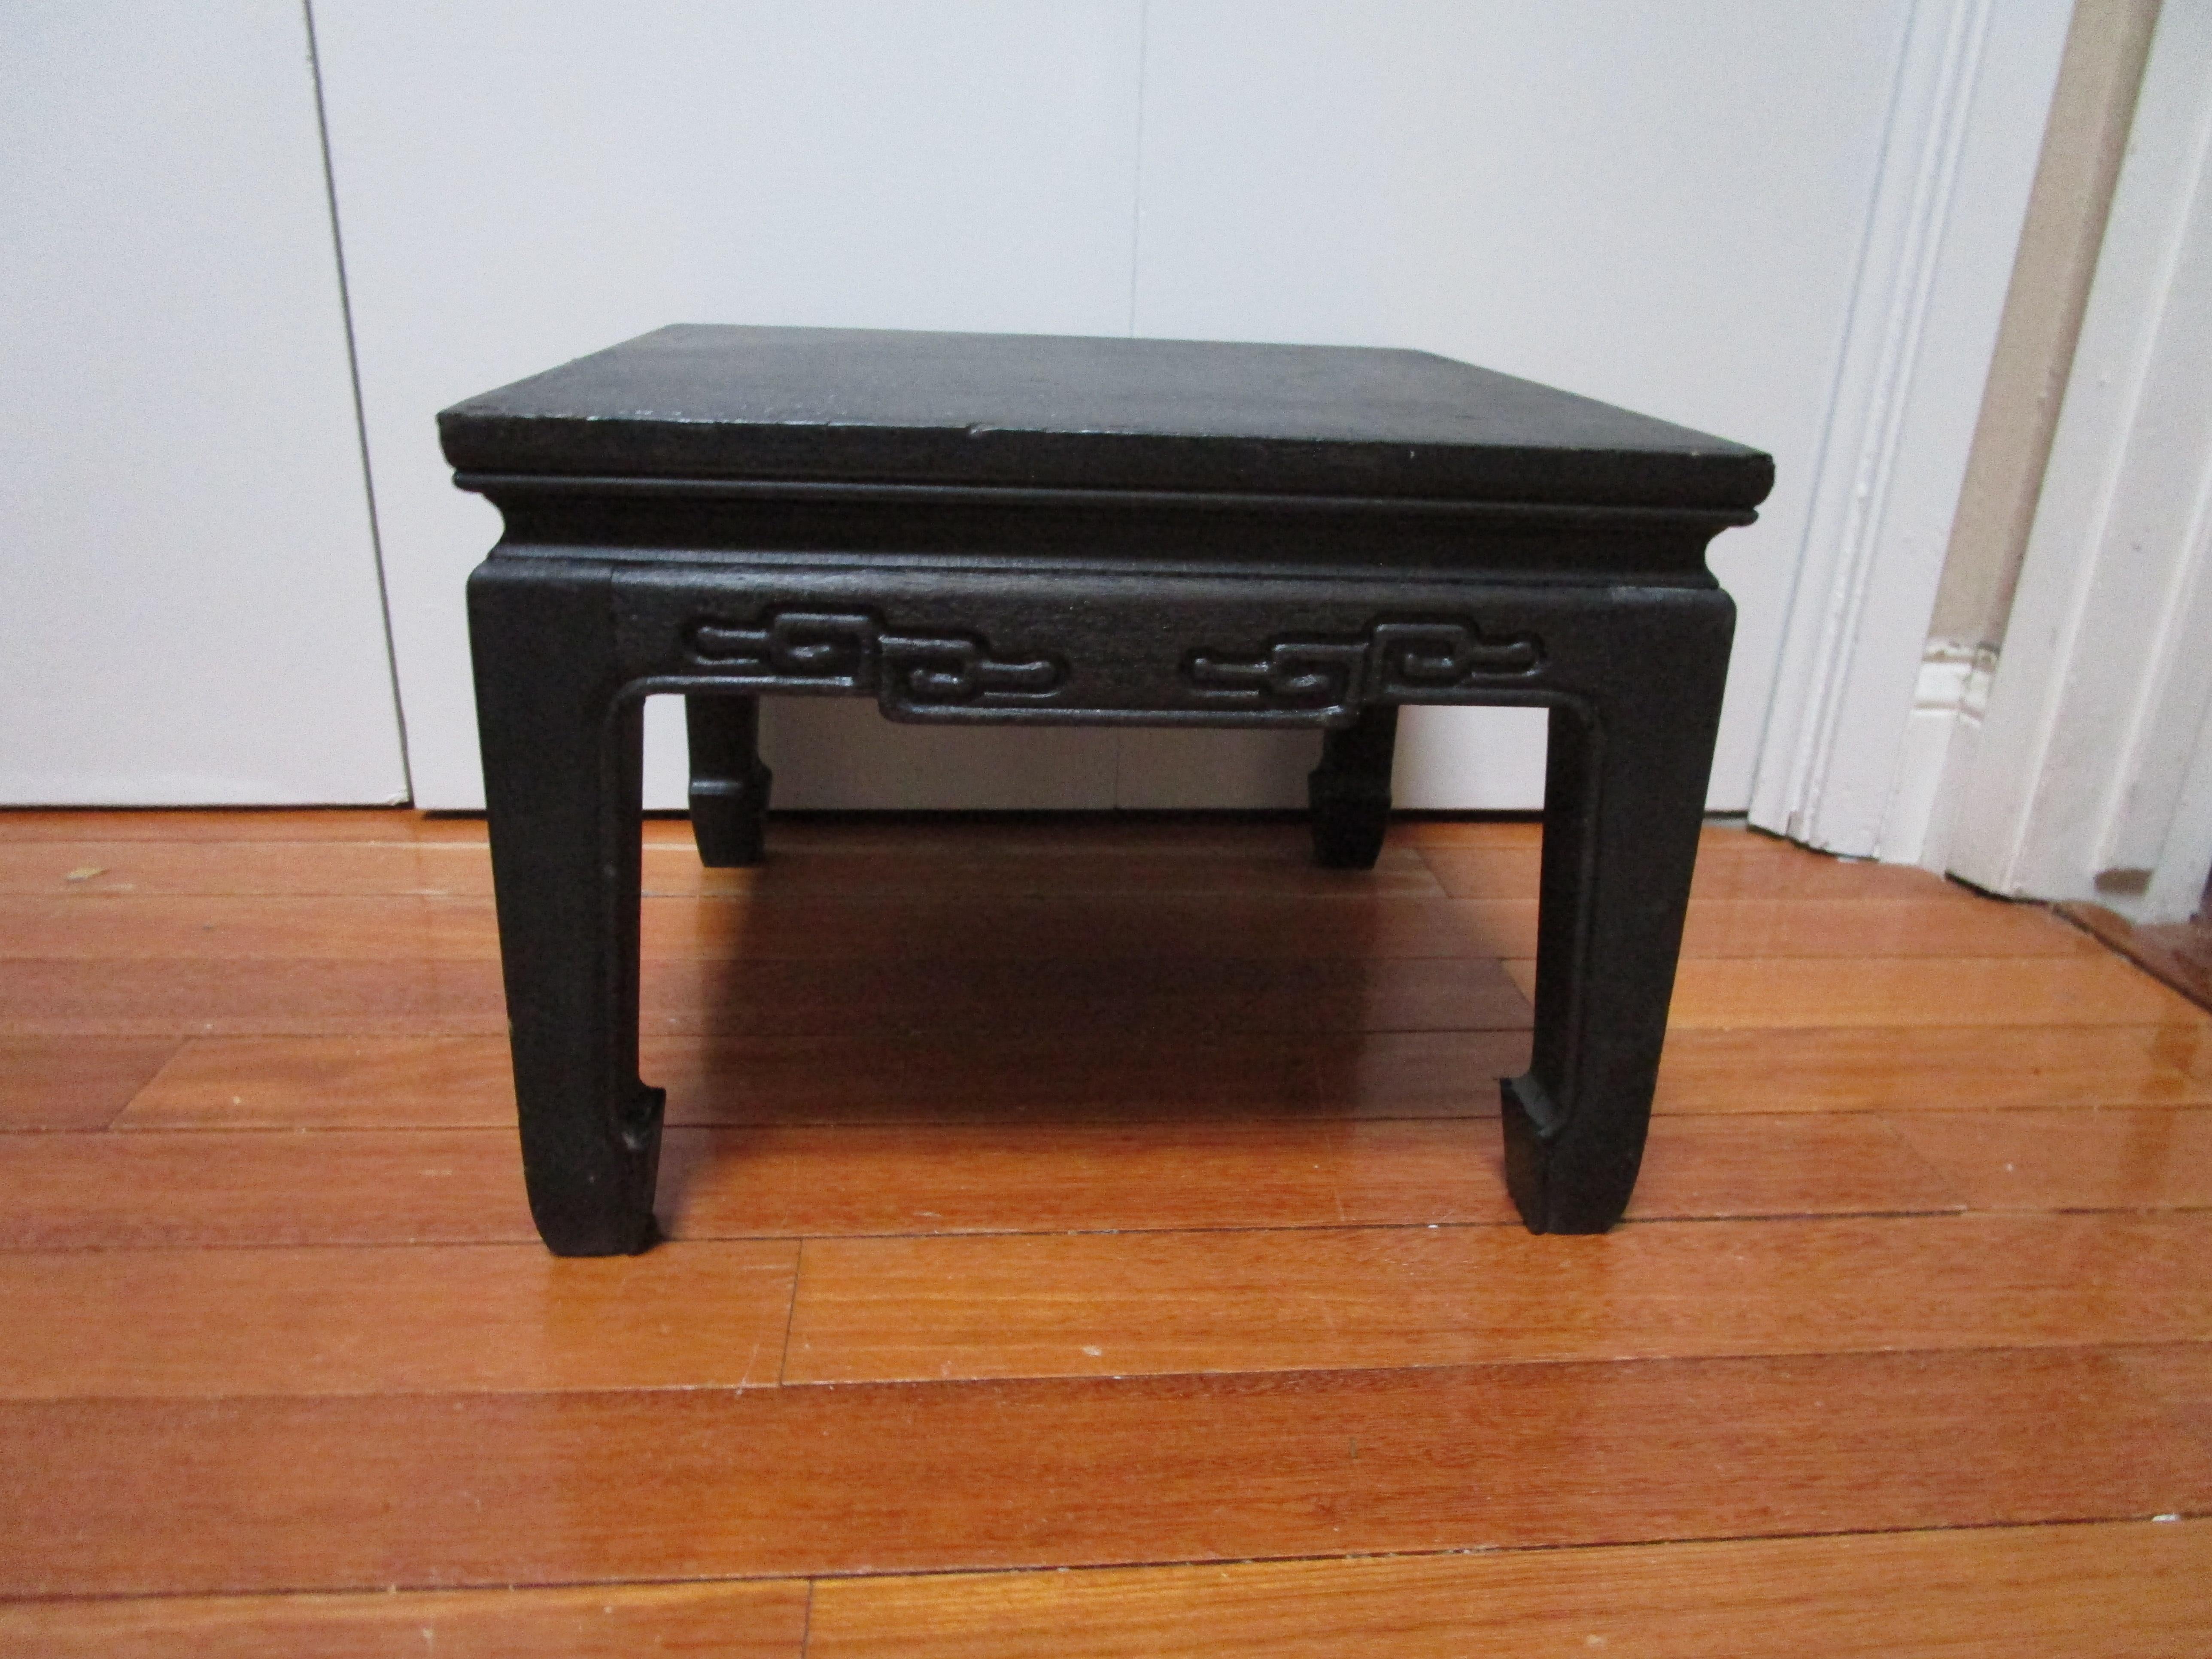 This Chinese foot rest is special. It is hand carved from heavy wood, possibly Ironwood with a cylindrical roller, and raised on four stout legs. 
It is from the Mid-20th Century. The ironwood provides the stool with a stunning texture. Our